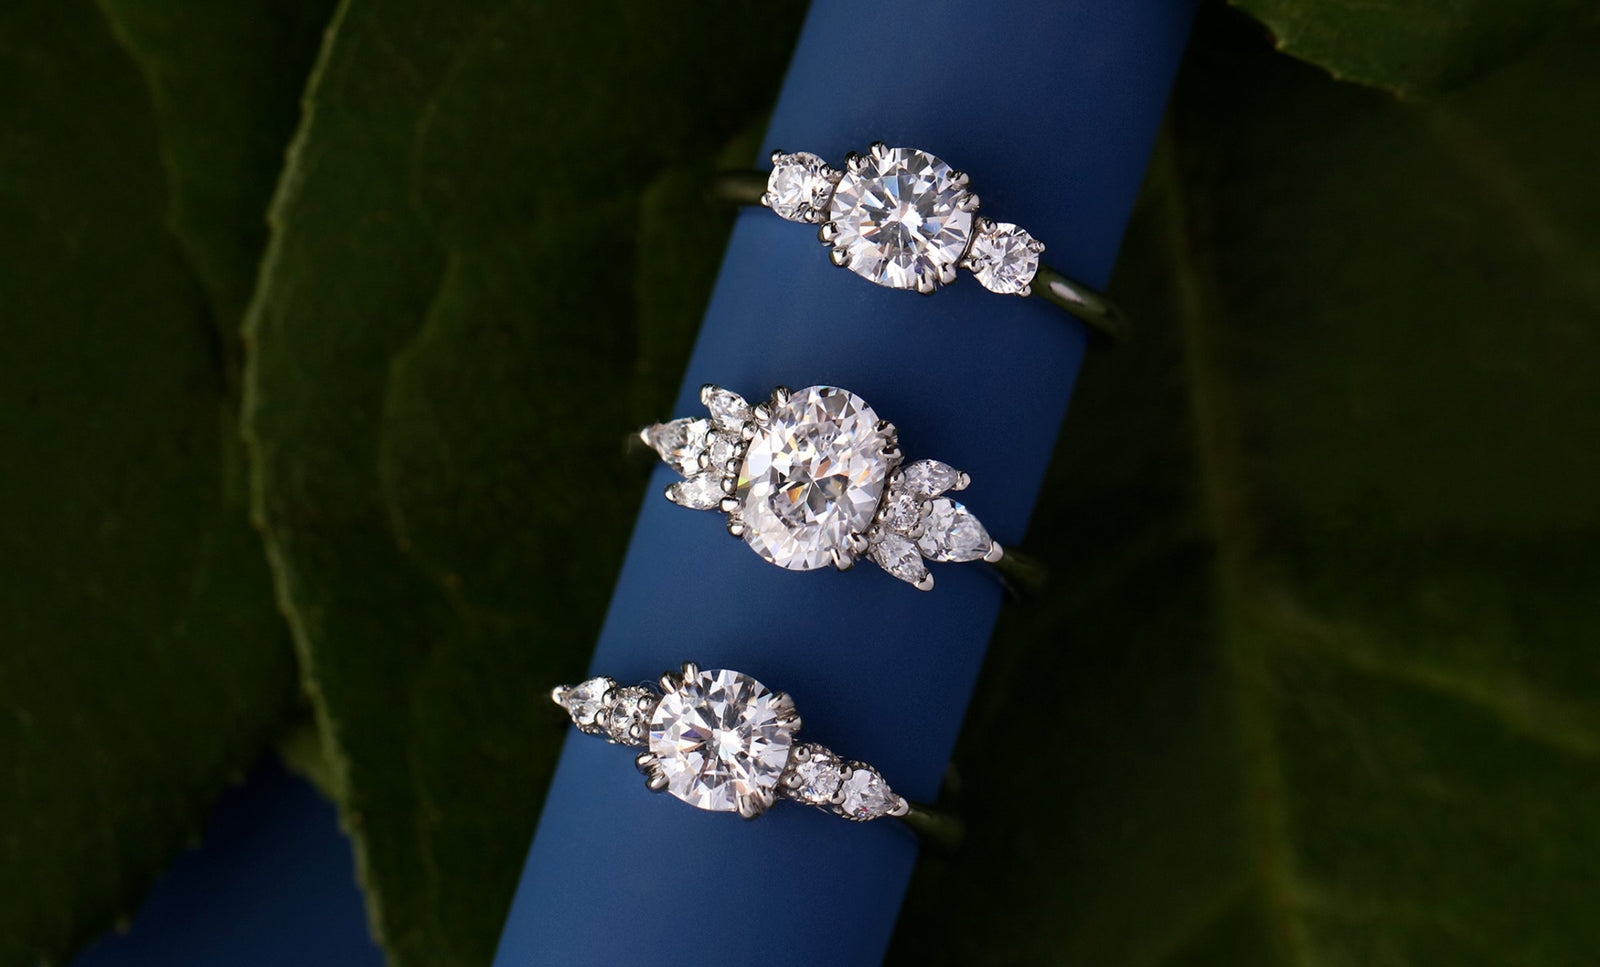 Traditional Engagement Rings vs. Unique Engagement Rings | Blooming Beauty  Ring Blog